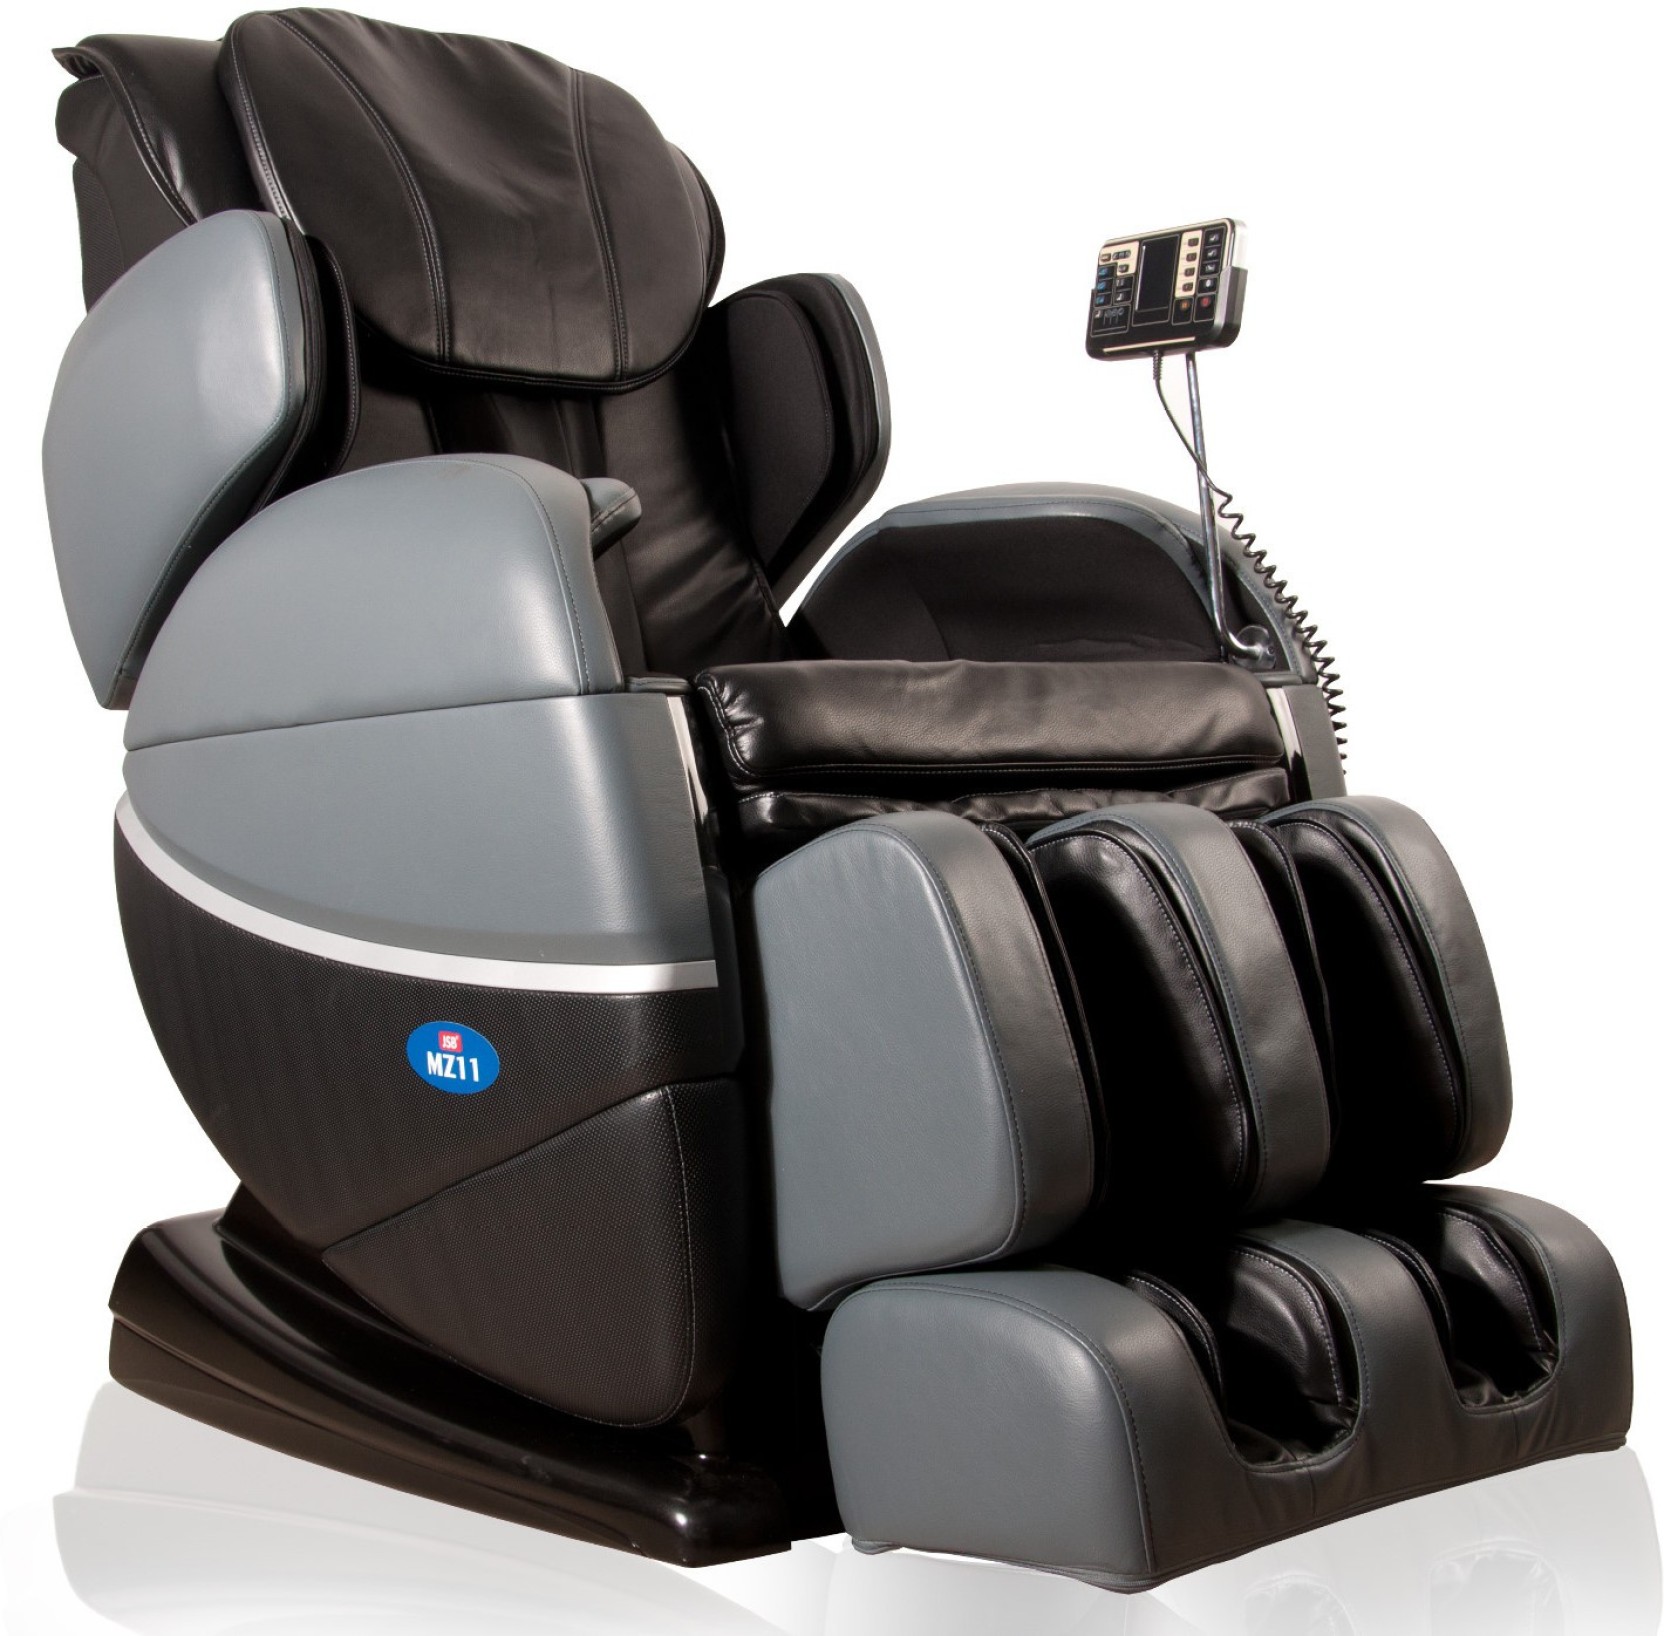 JSB MZ11 Full Body Massage Chair Recliner Massager - Price in India